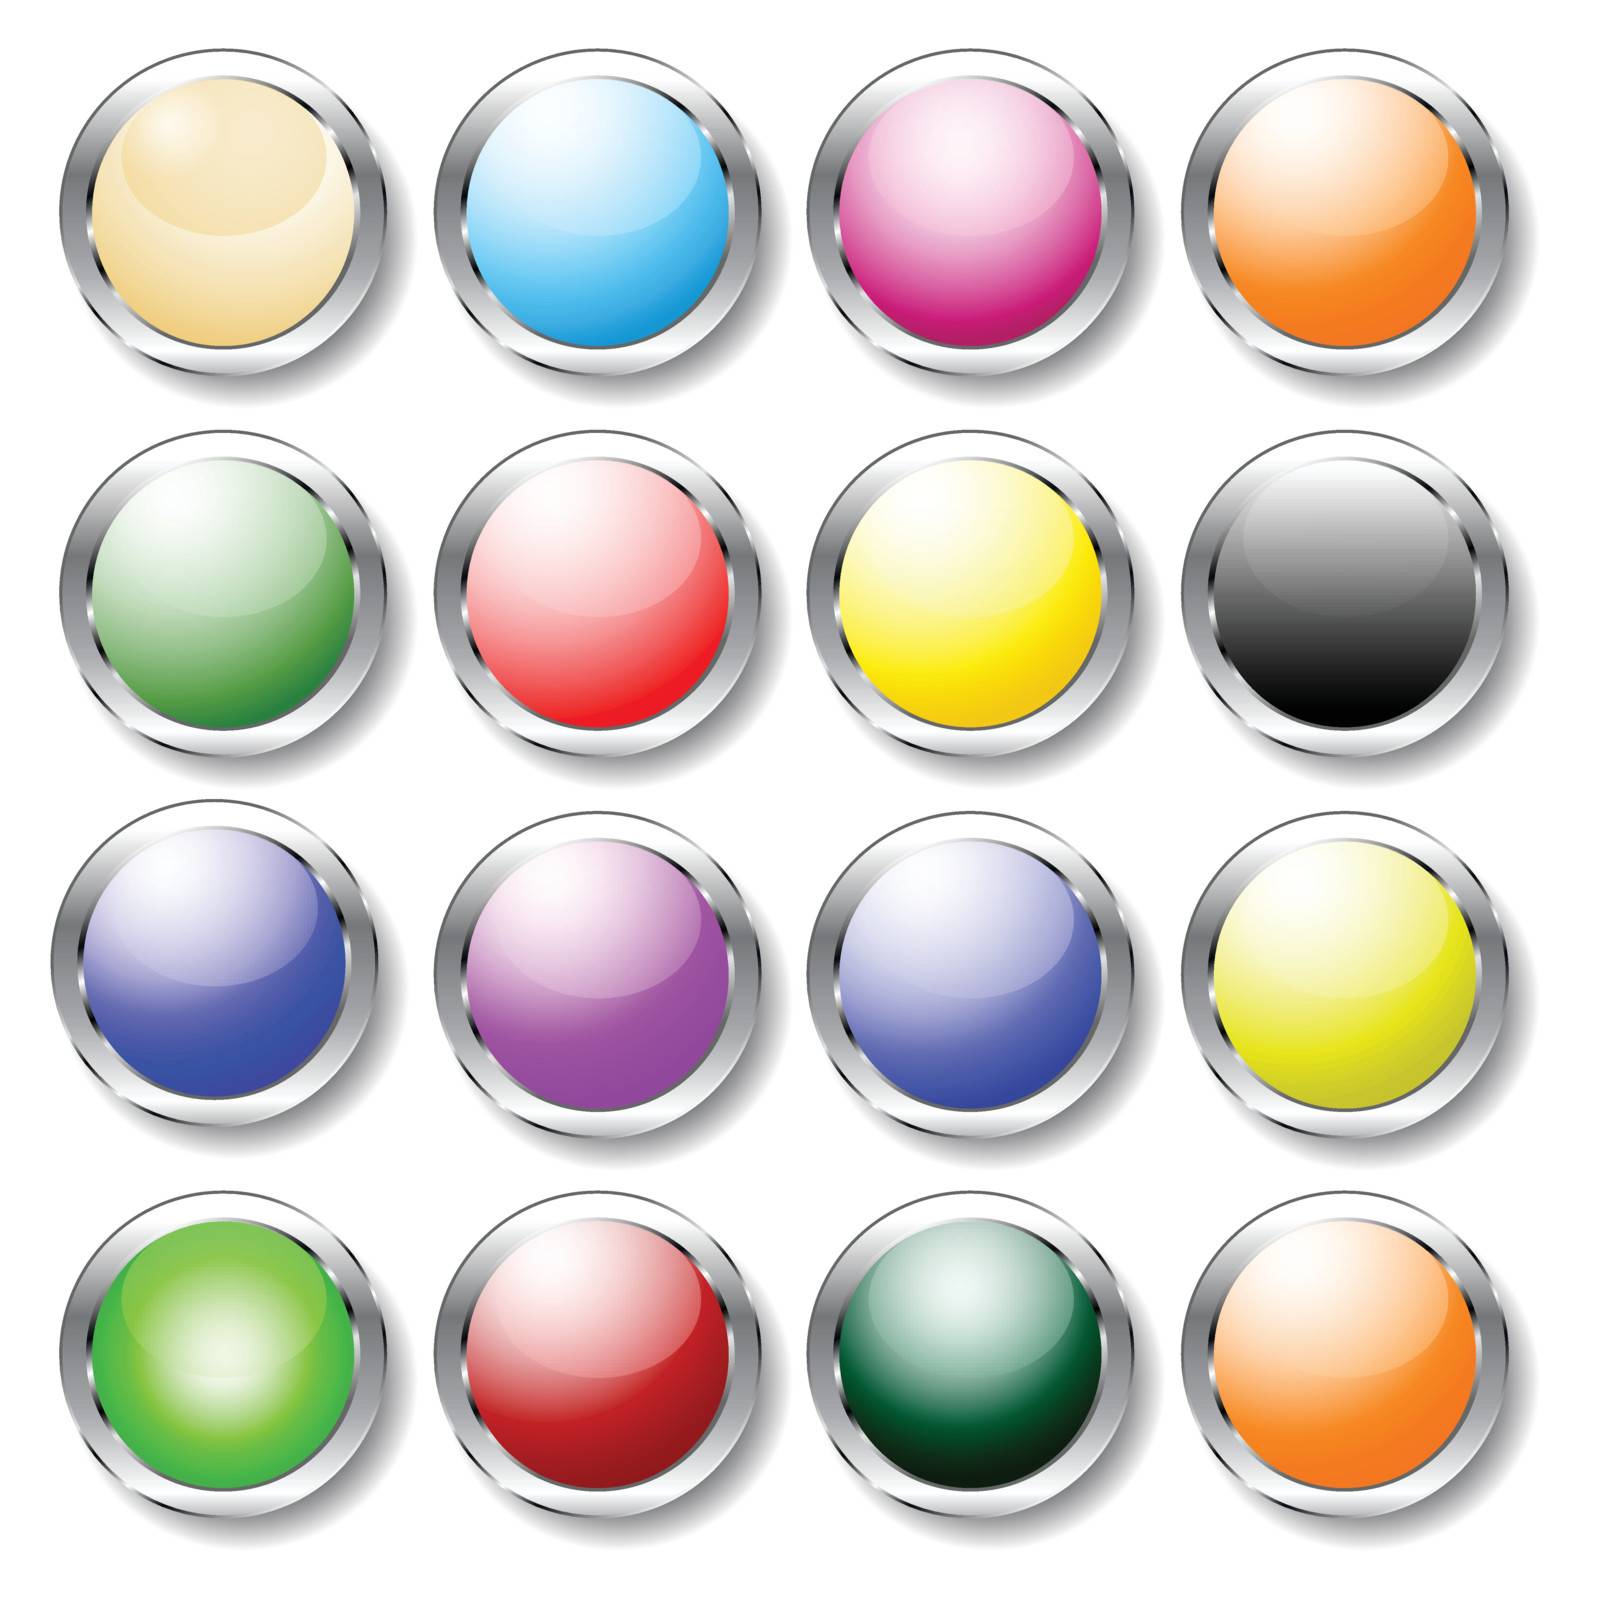 Glossy buttons for web